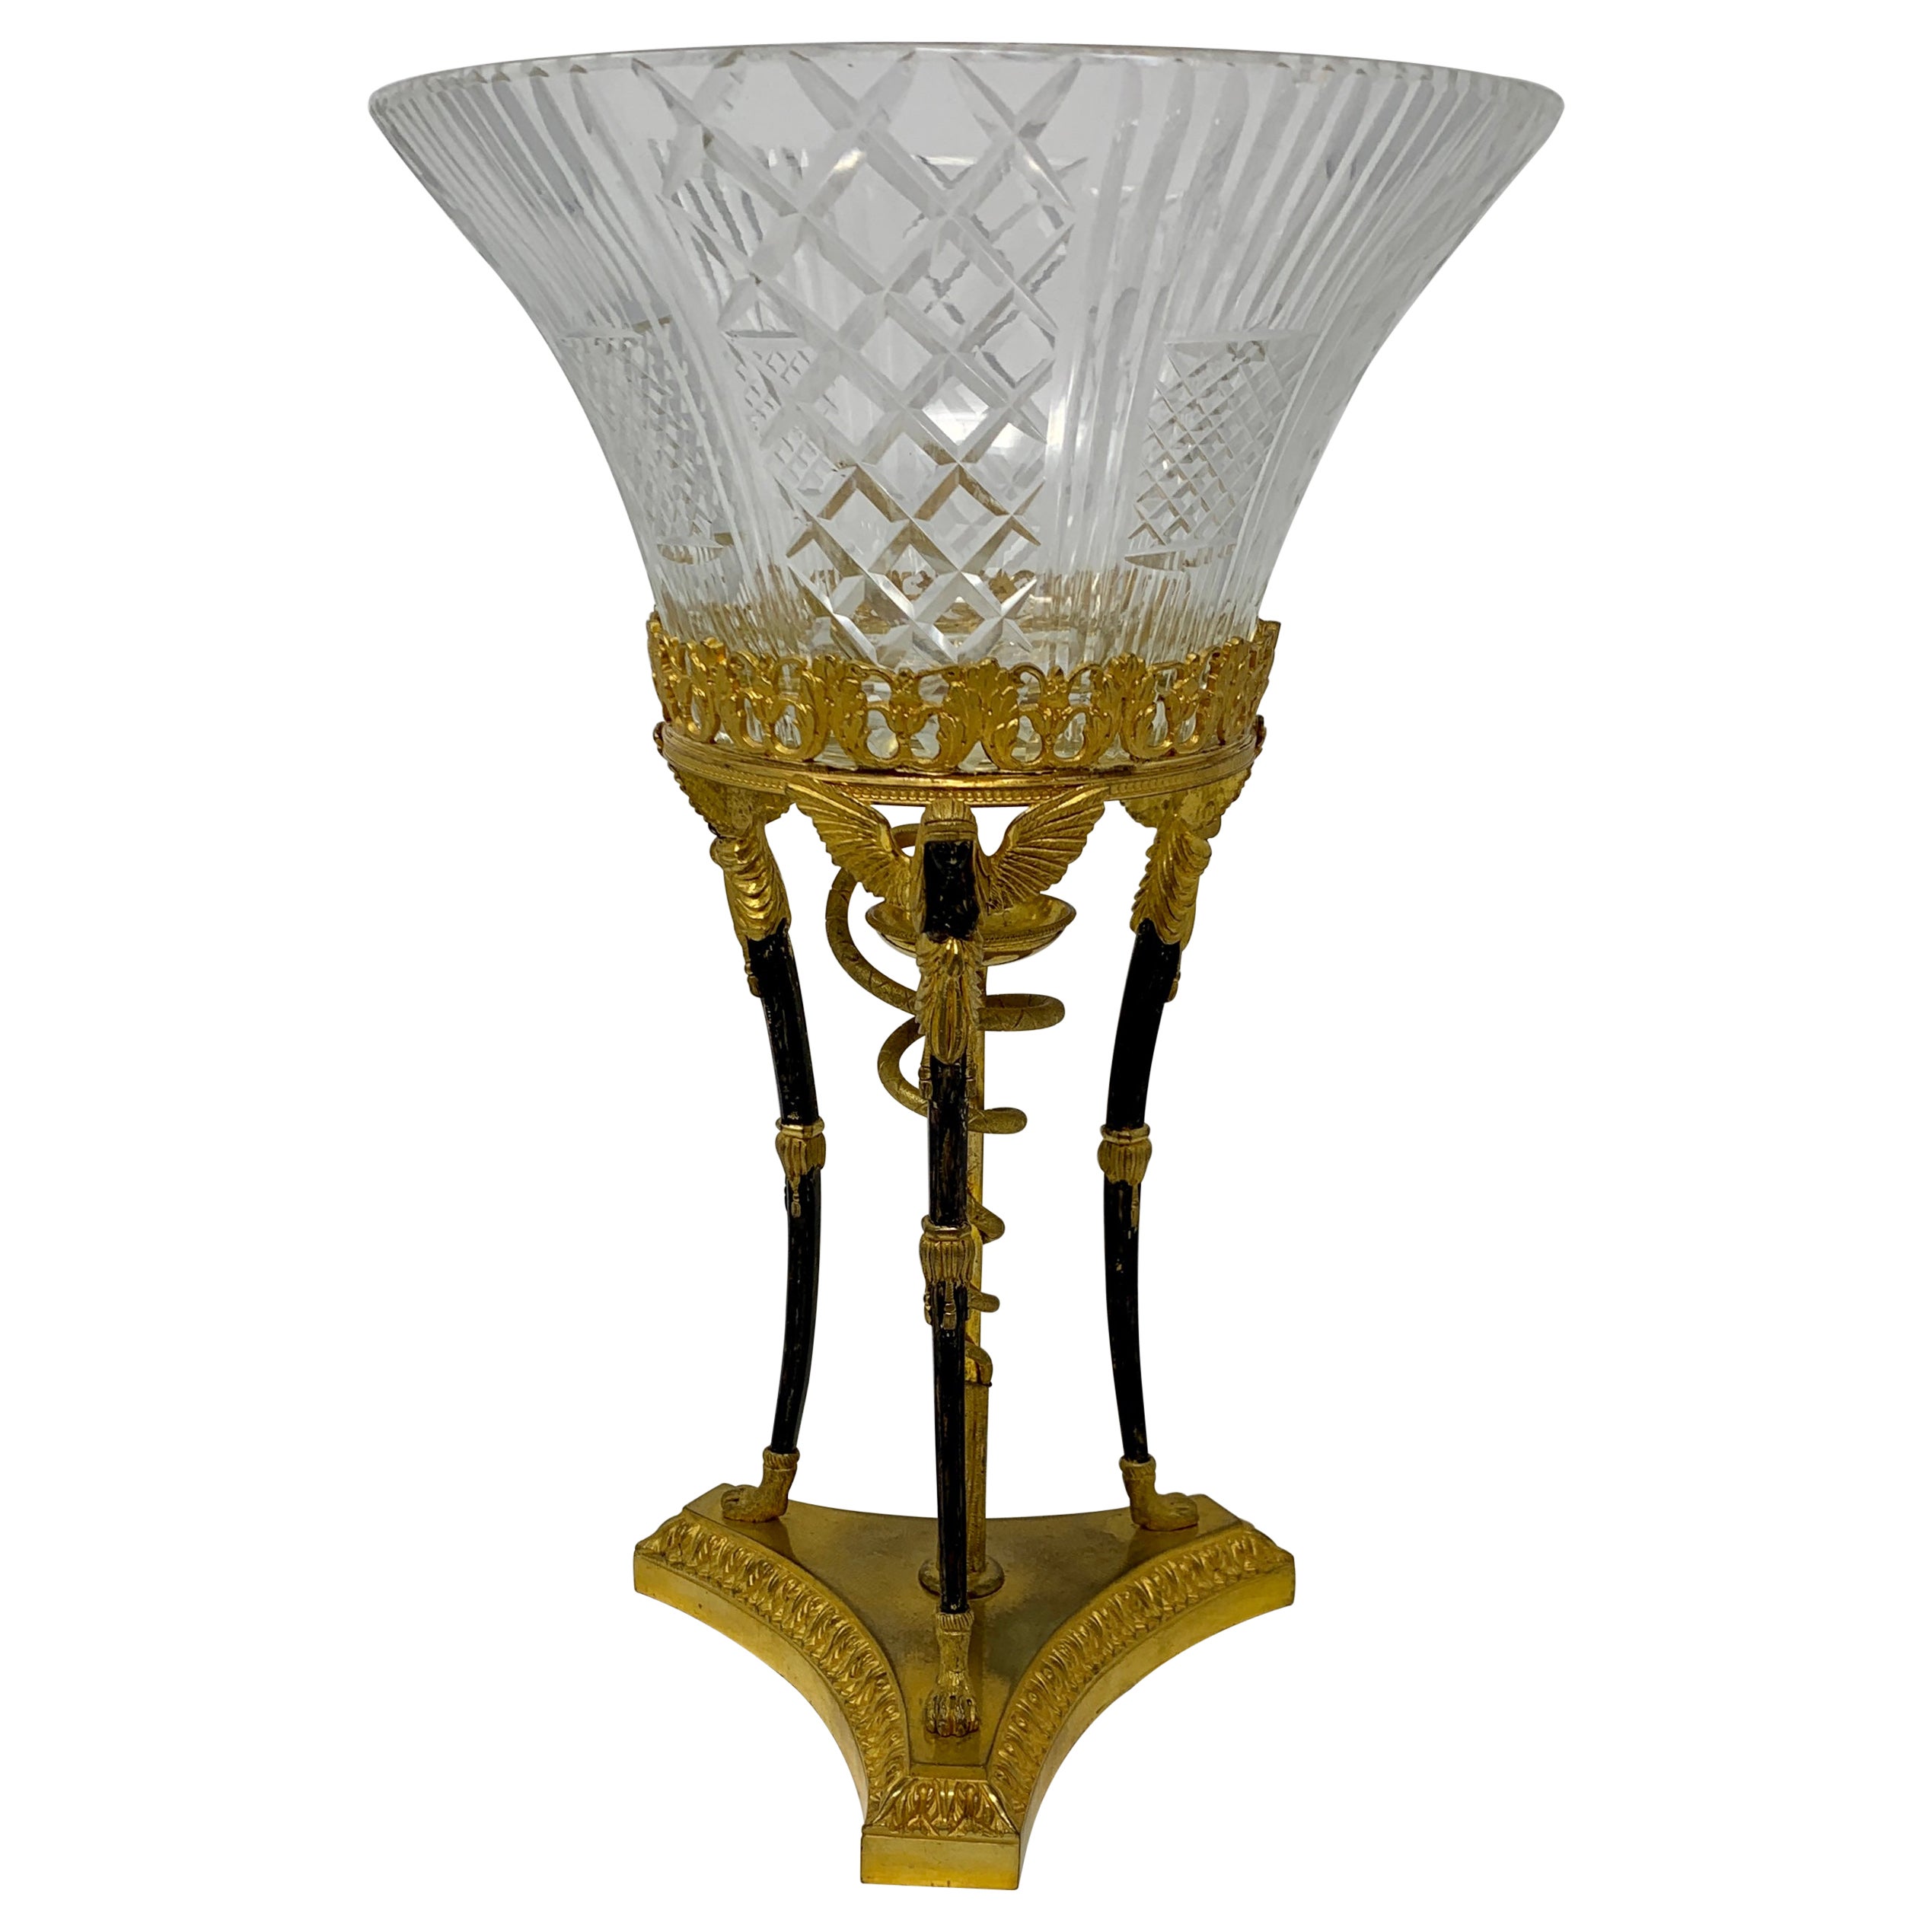 Antique French Empire Period Crystal and Ormolu Centerpiece, circa 1815-1825 For Sale